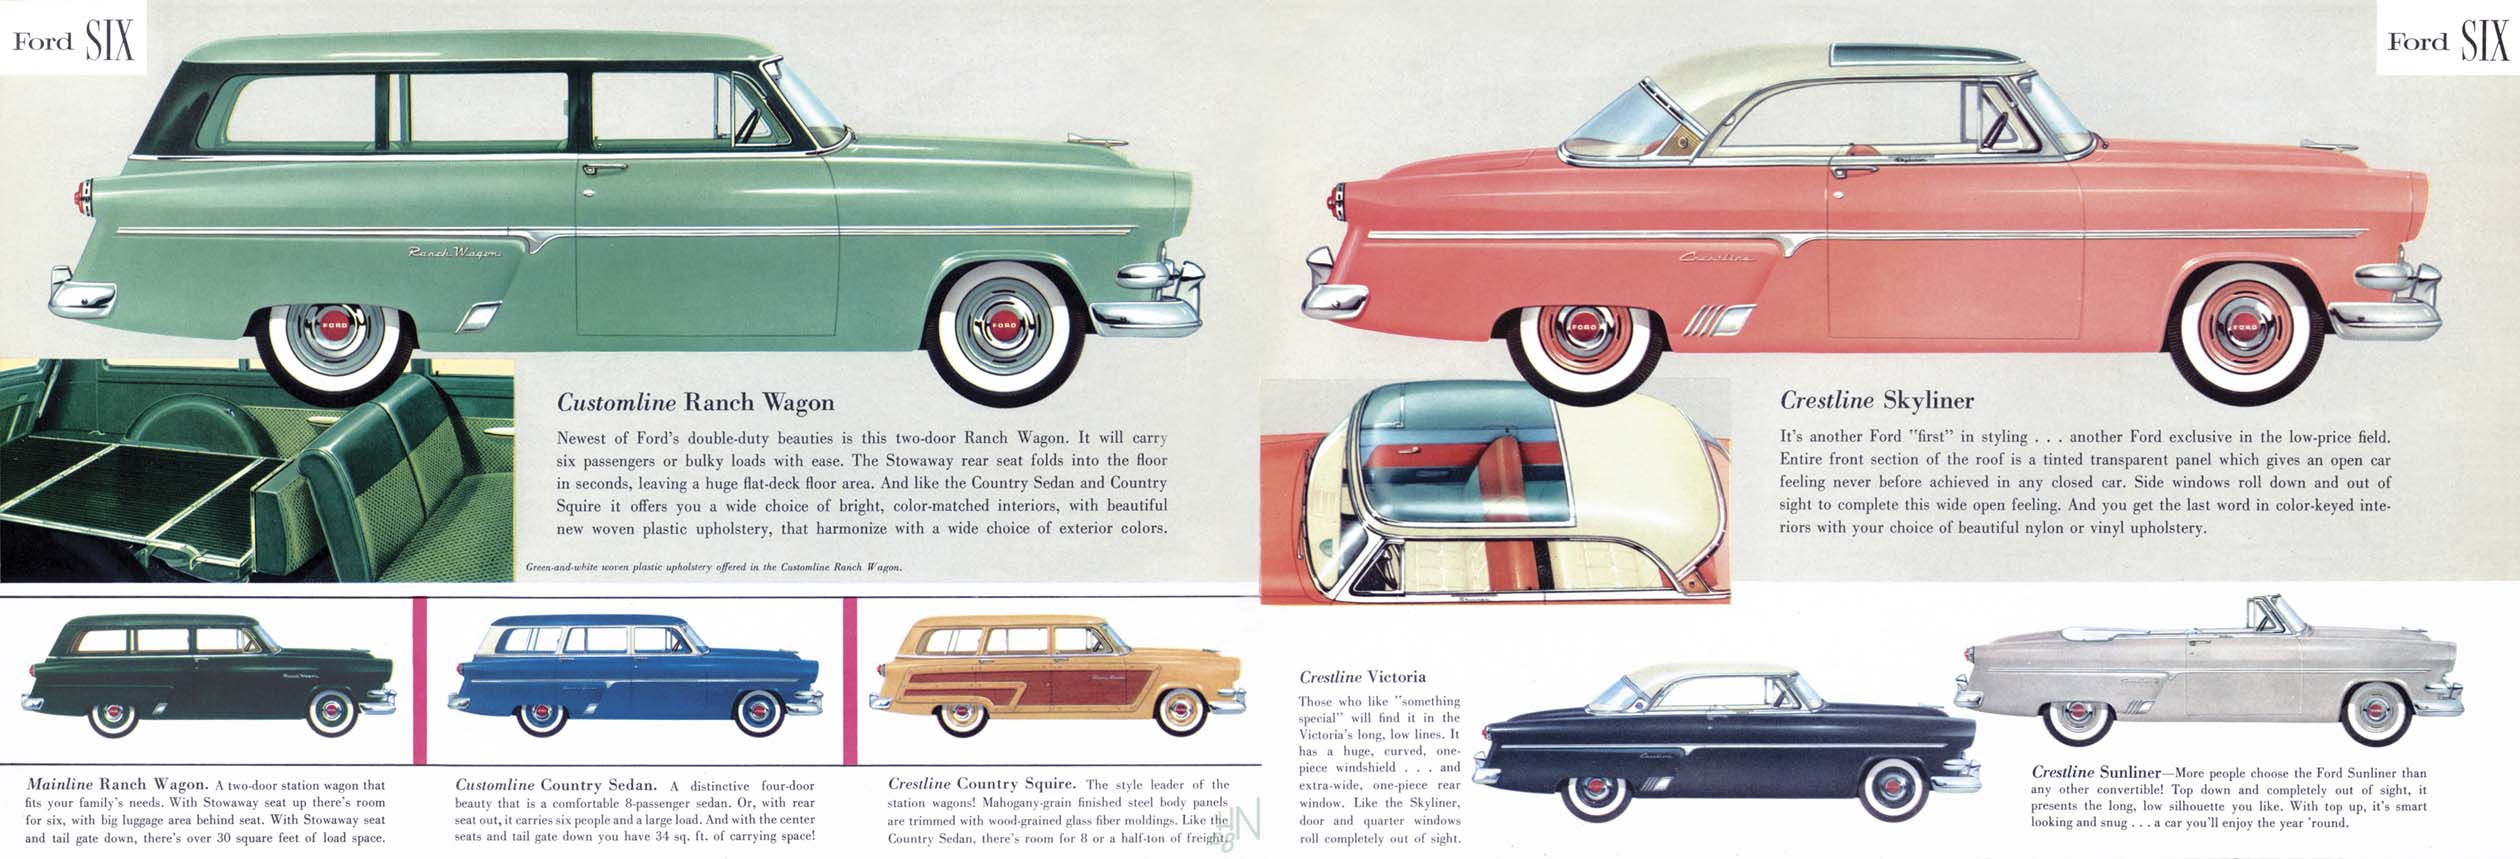 1954 Ford Six Brochure Page 6